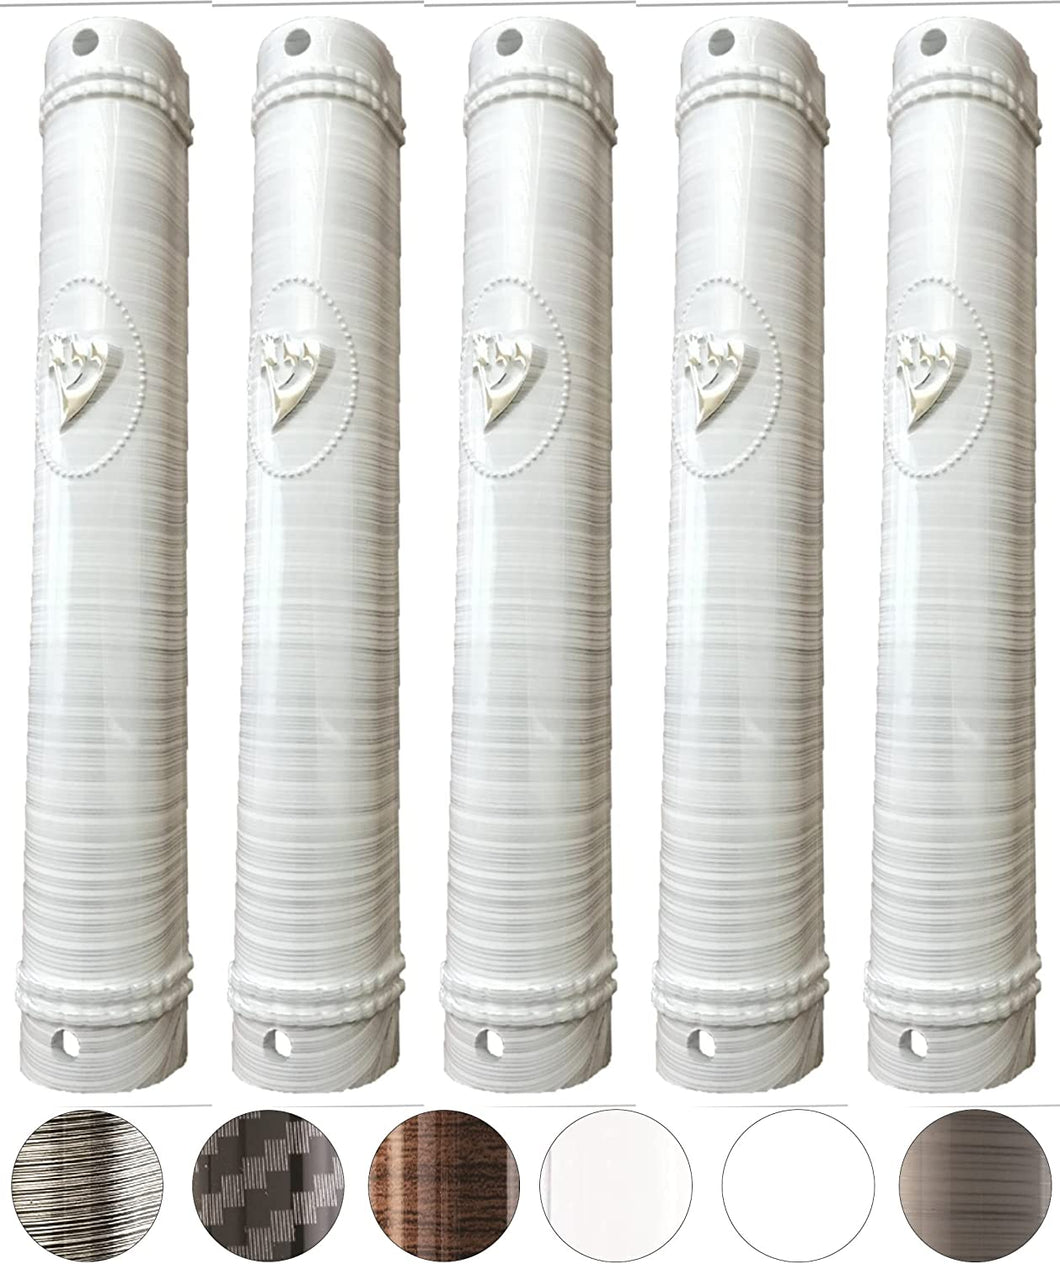 PLASTIC MEZUZAH CASE White and Silver Lines  Semiround silver shin self Stick Waterproof Rubber Cork Sold in unit of 5 pcs